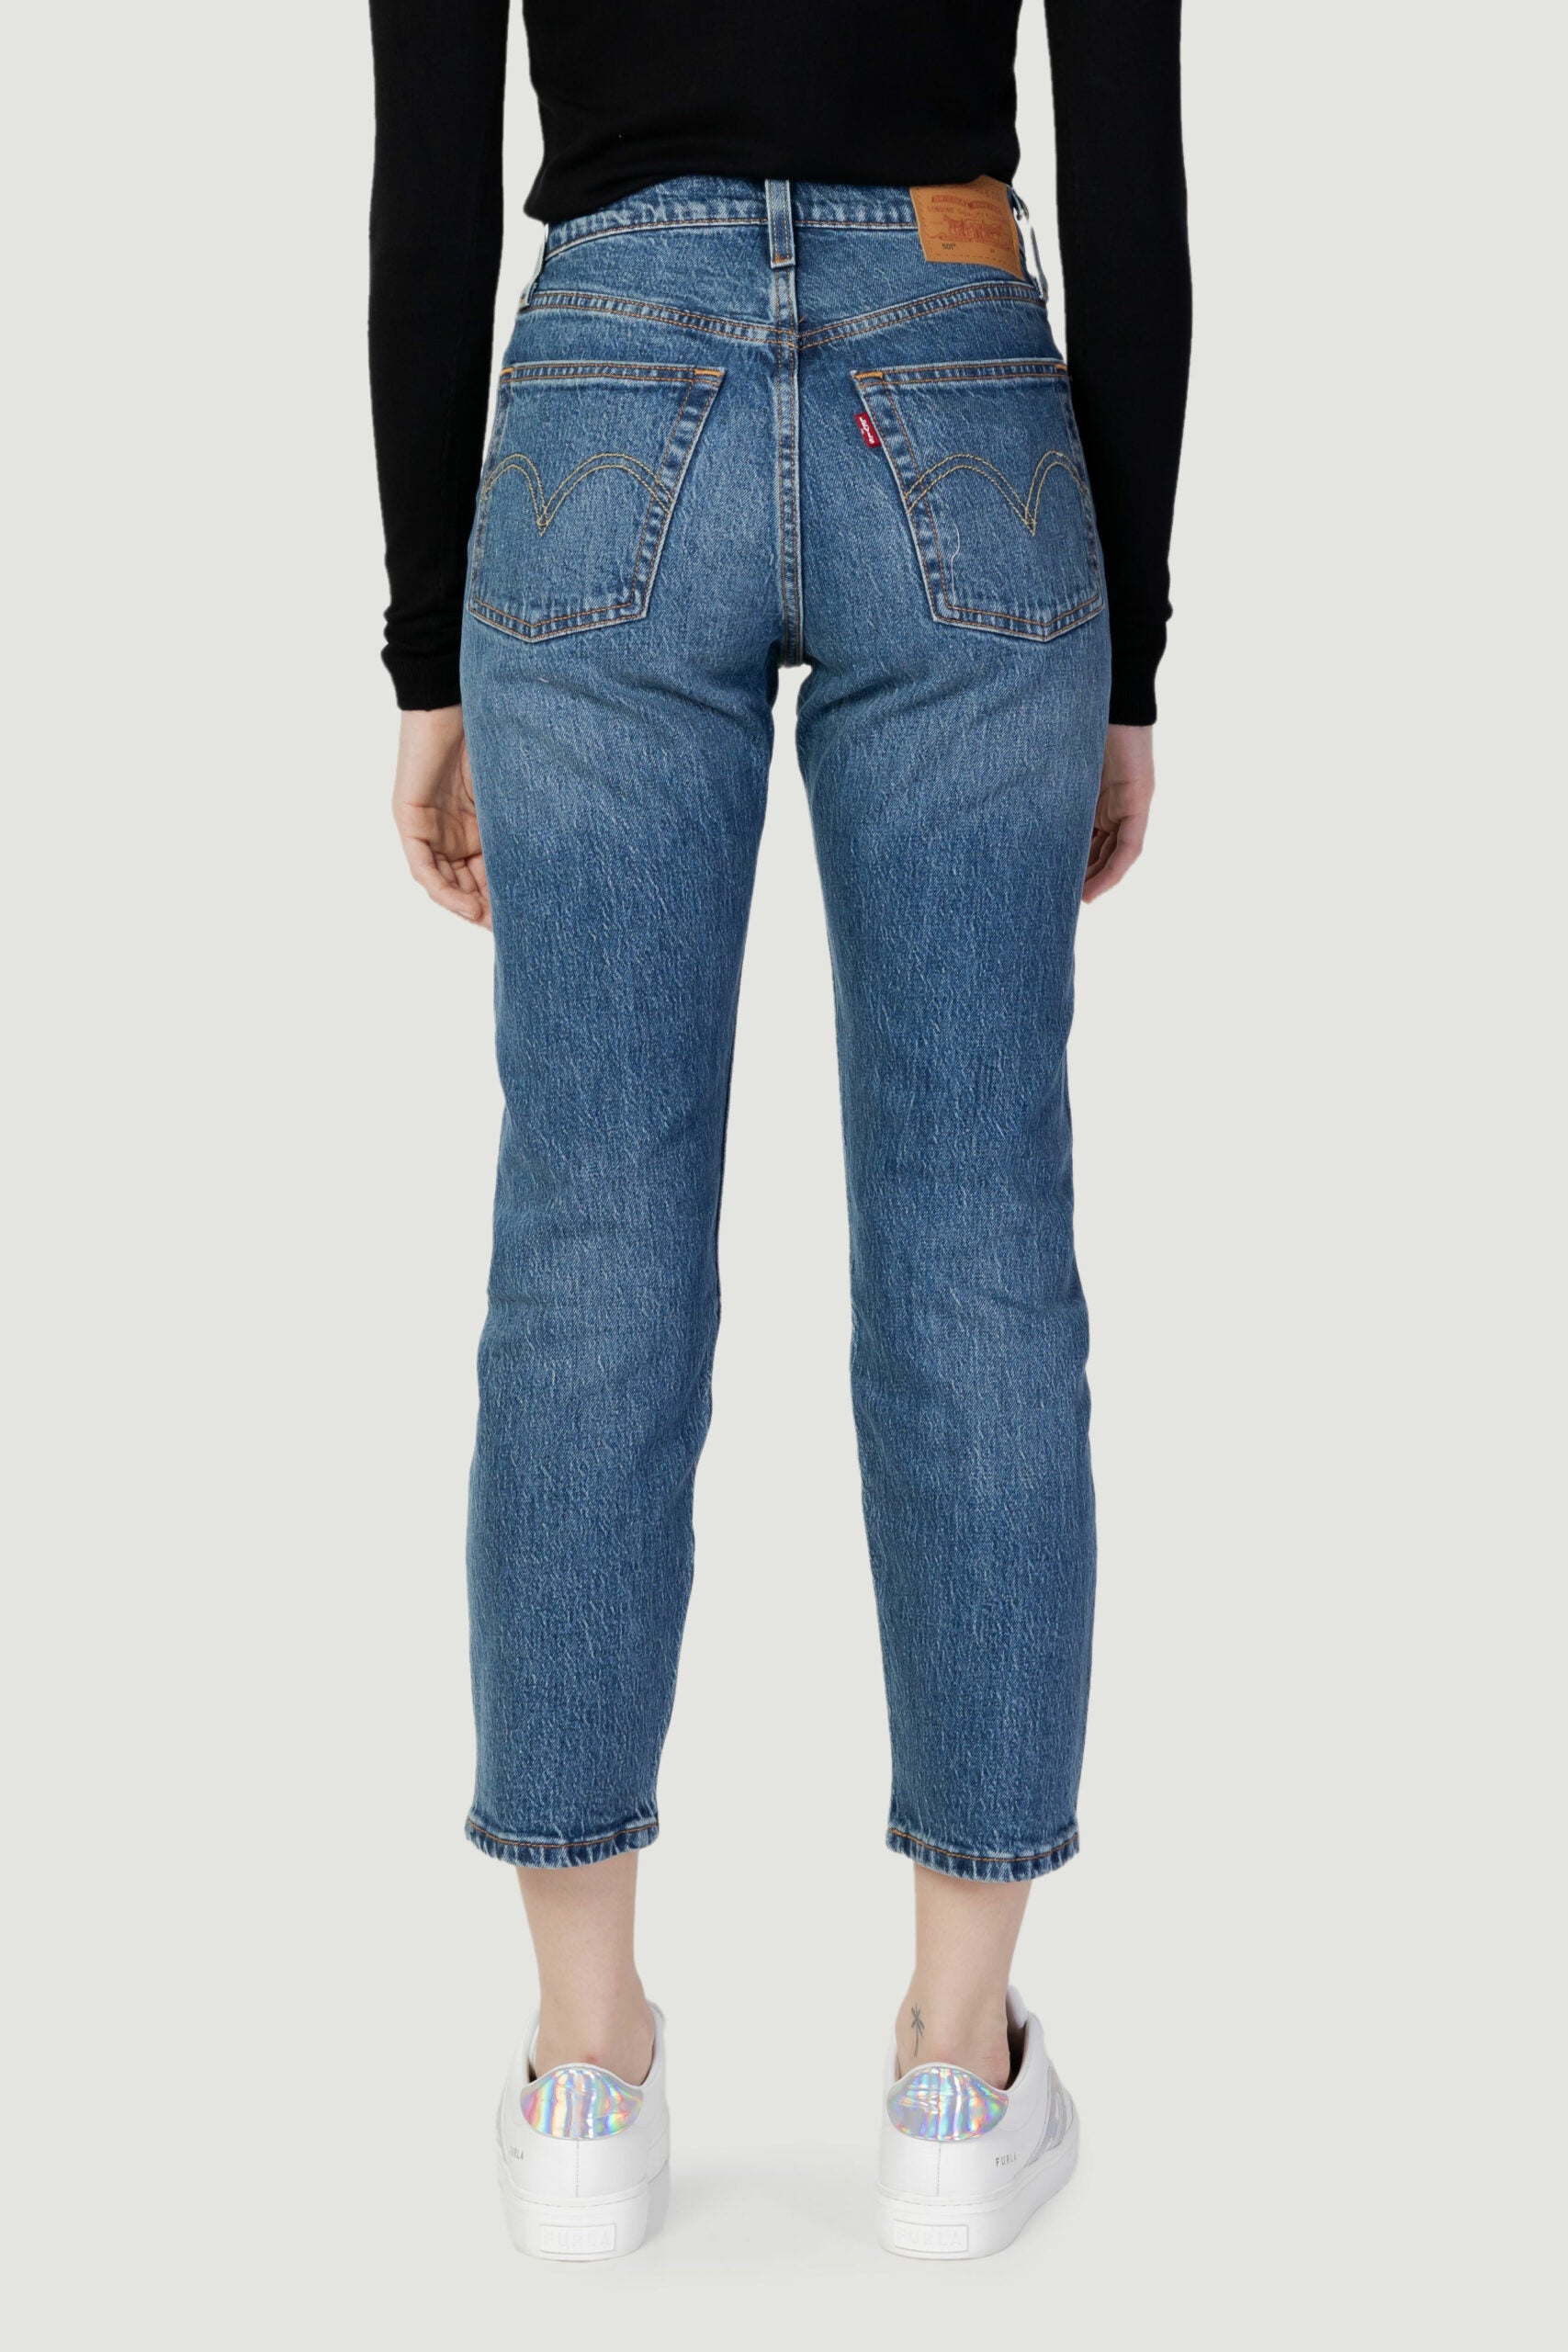 Levi's donna jeans 501 crop stand off 36200-0291